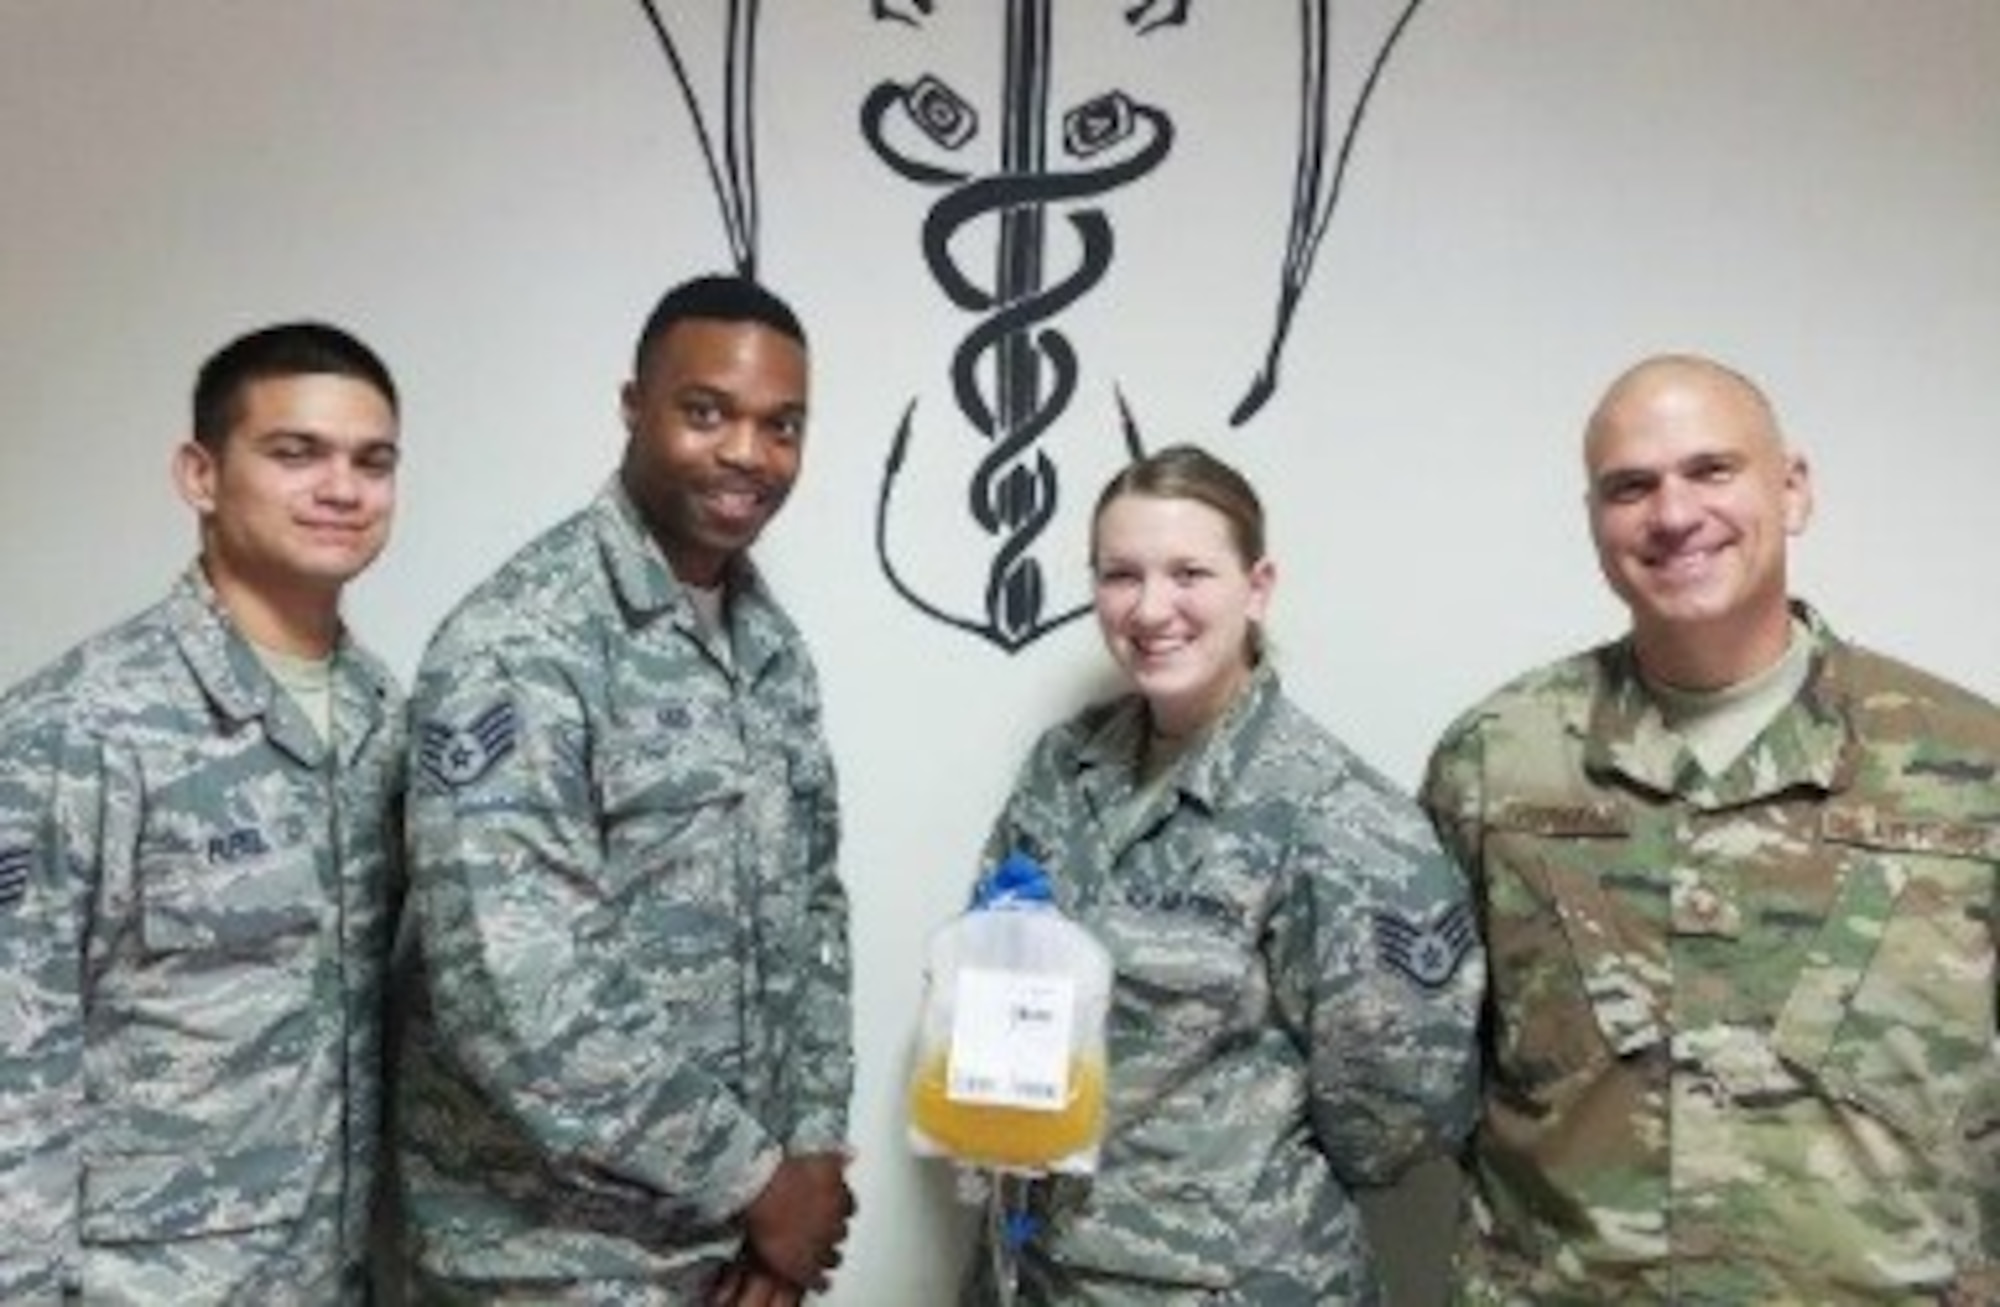 The apheresis team collected the first cold storage platelet unit in Southwest Asia, Aug. 16, 2017. Air Force Senior Master Sgt. Scott Thibodeau (right) was the first donor. (Courtesy photo)